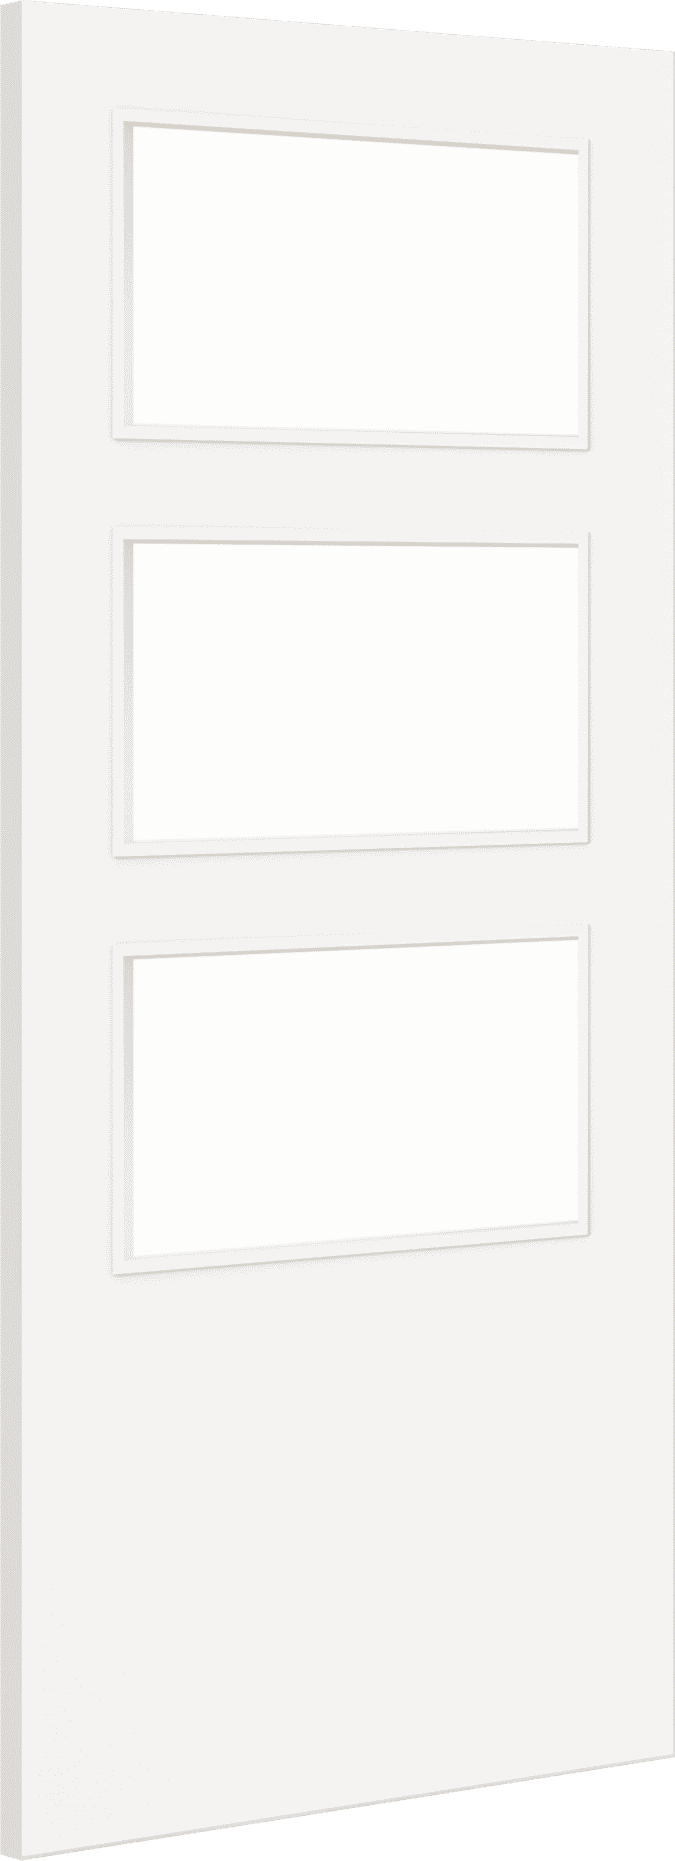 1981mm x 686mm x 44mm (27") Architectural Paint Grade White 03 Clear Glazed Fire Door Blank